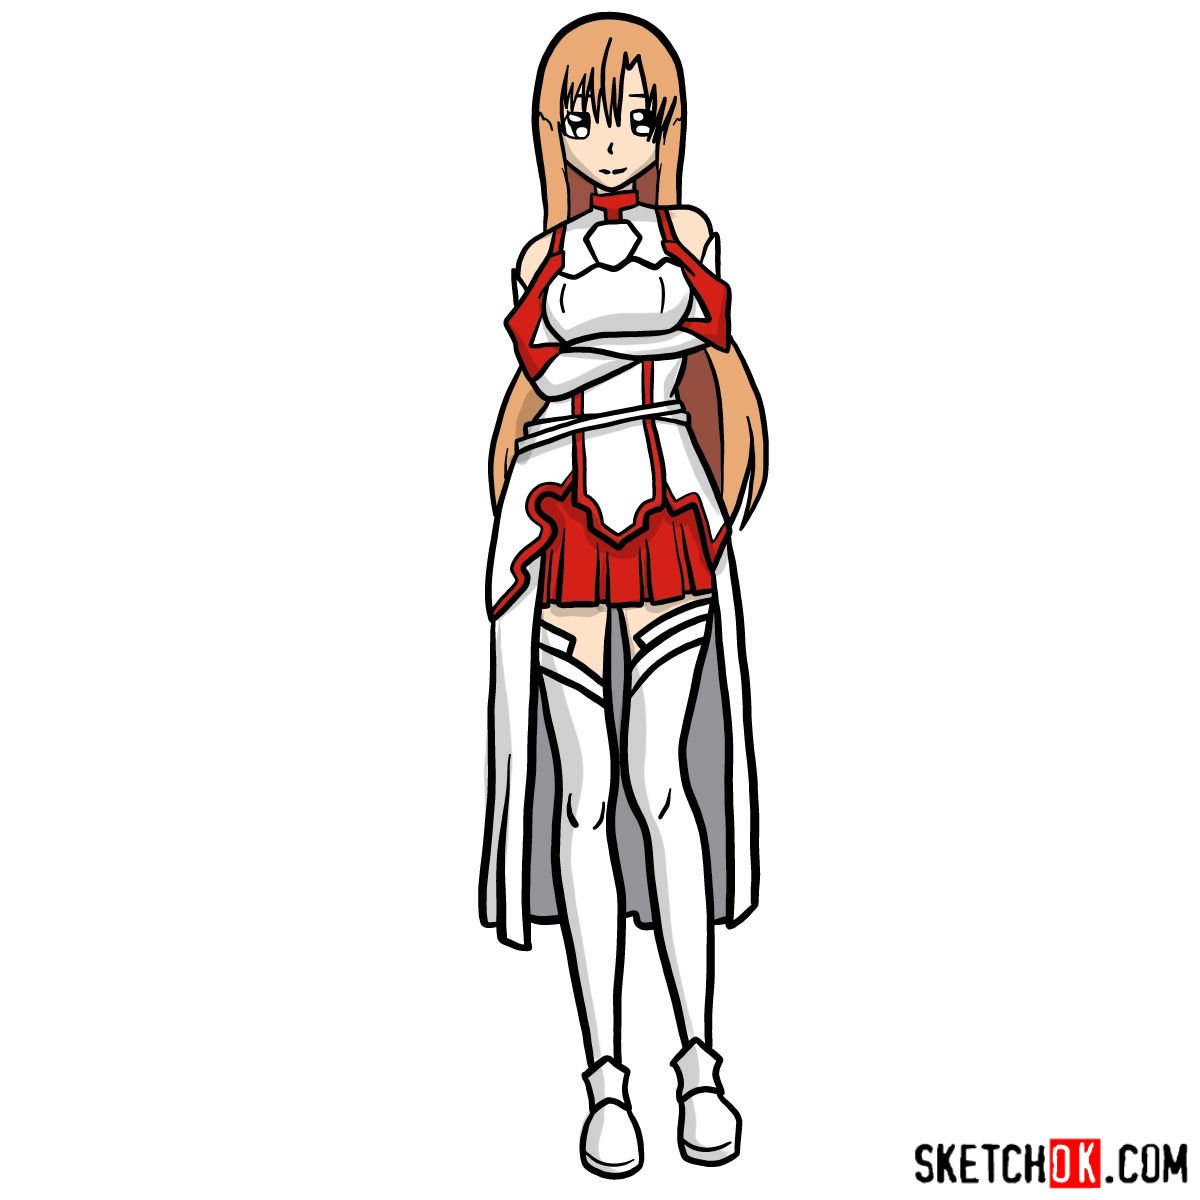 How to draw Yuuki Asuna from Sword Art Online anime